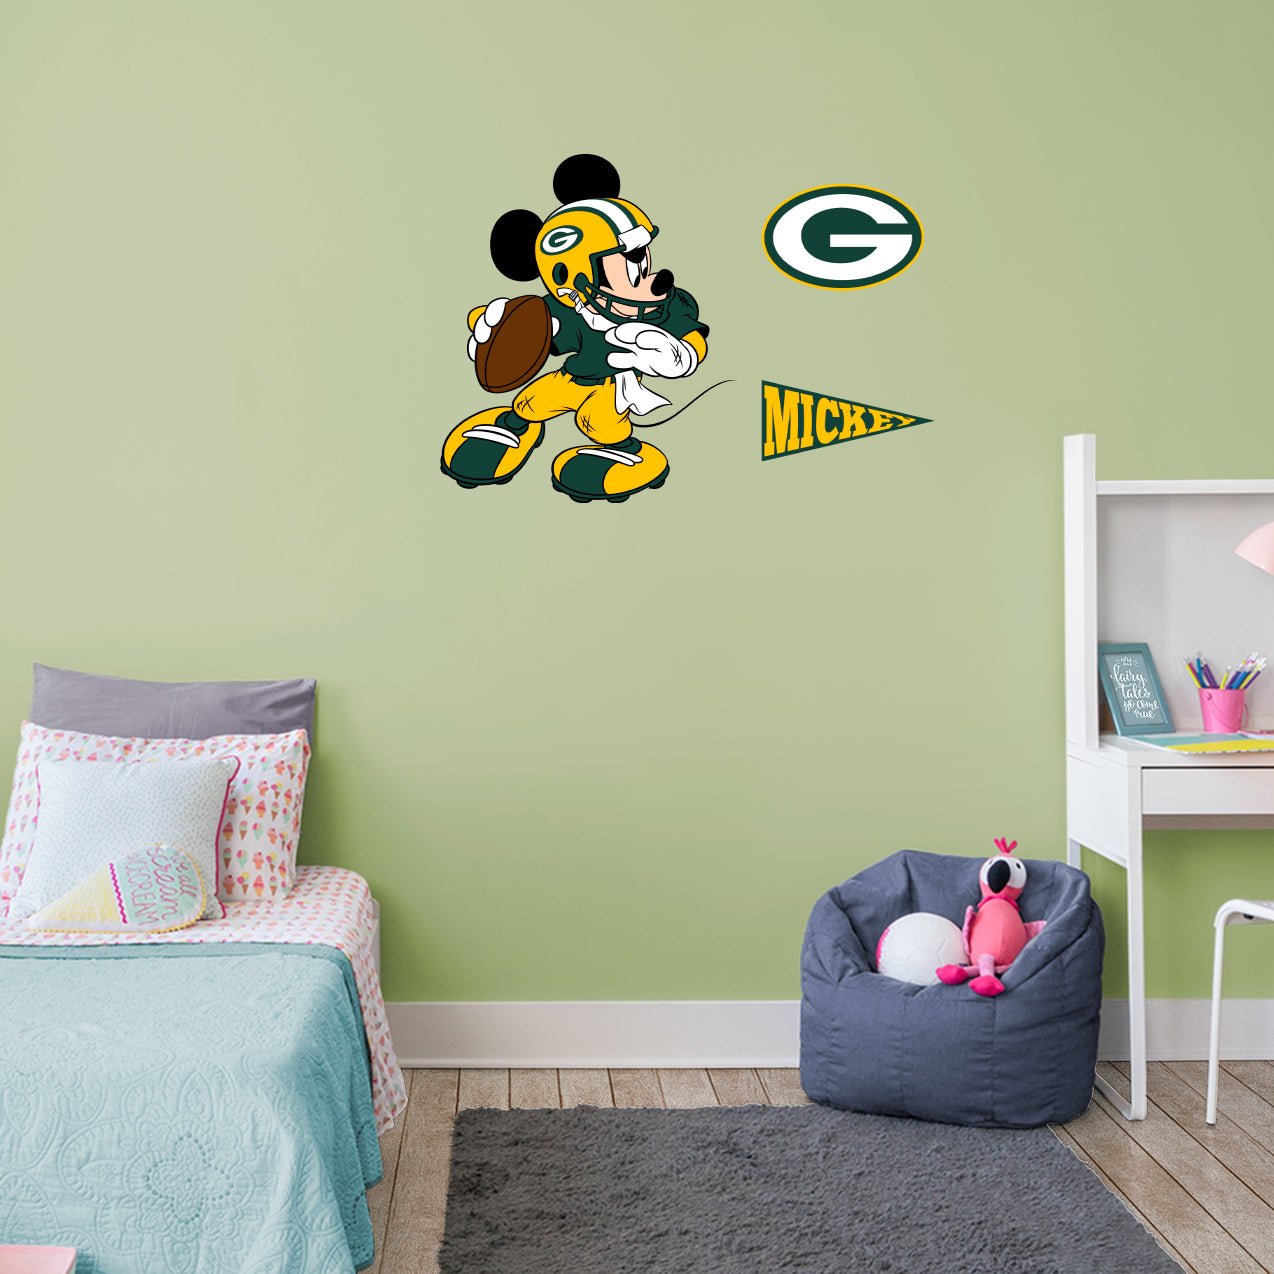 Green Bay Packers: Mickey Mouse - Officially Licensed NFL Removable Adhesive Decal